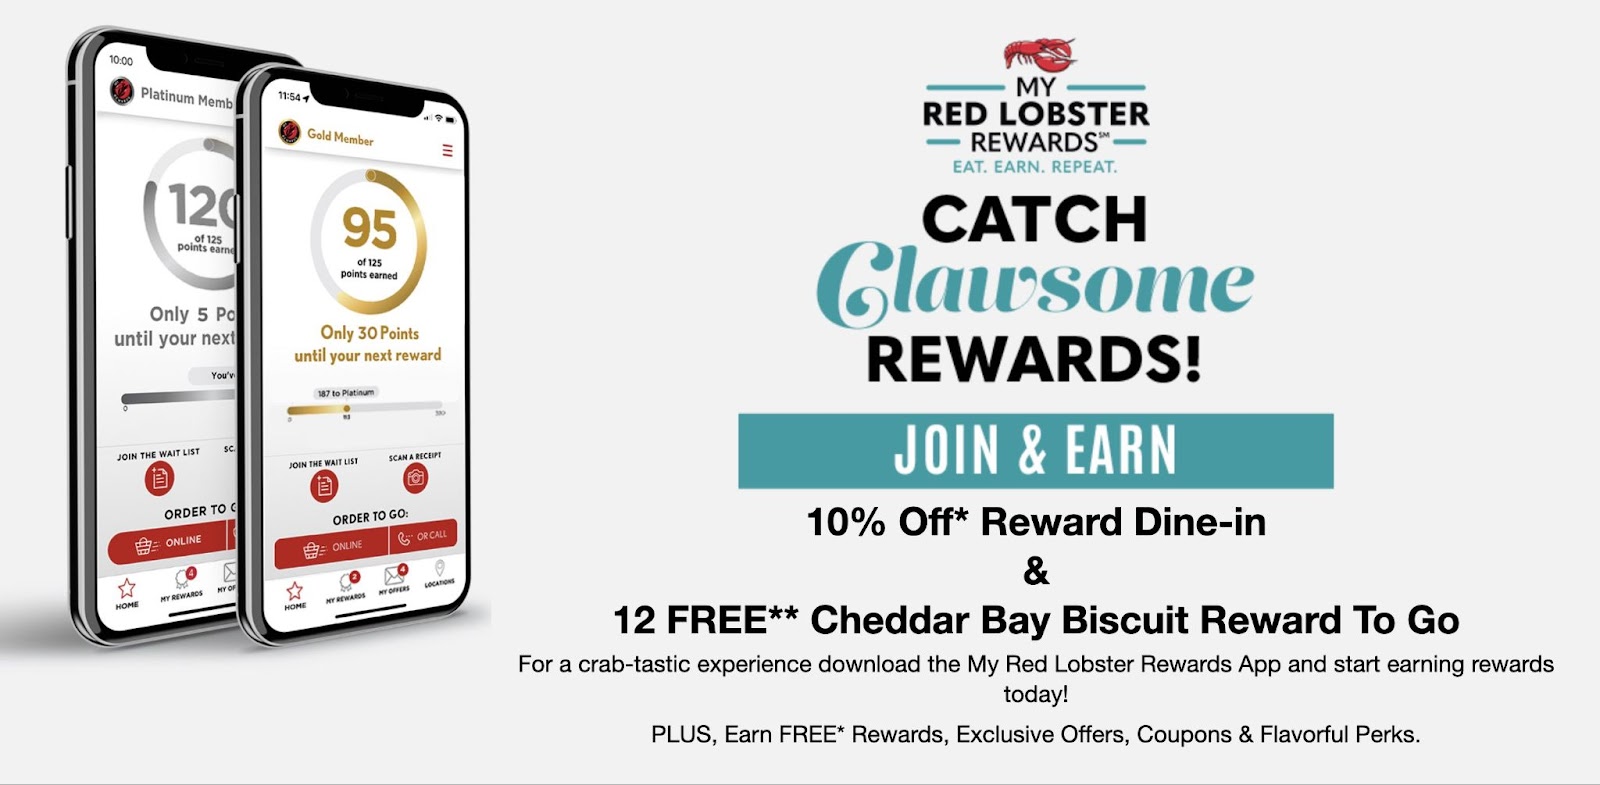 Red Lobster's lead magnet for a 10% off coupon